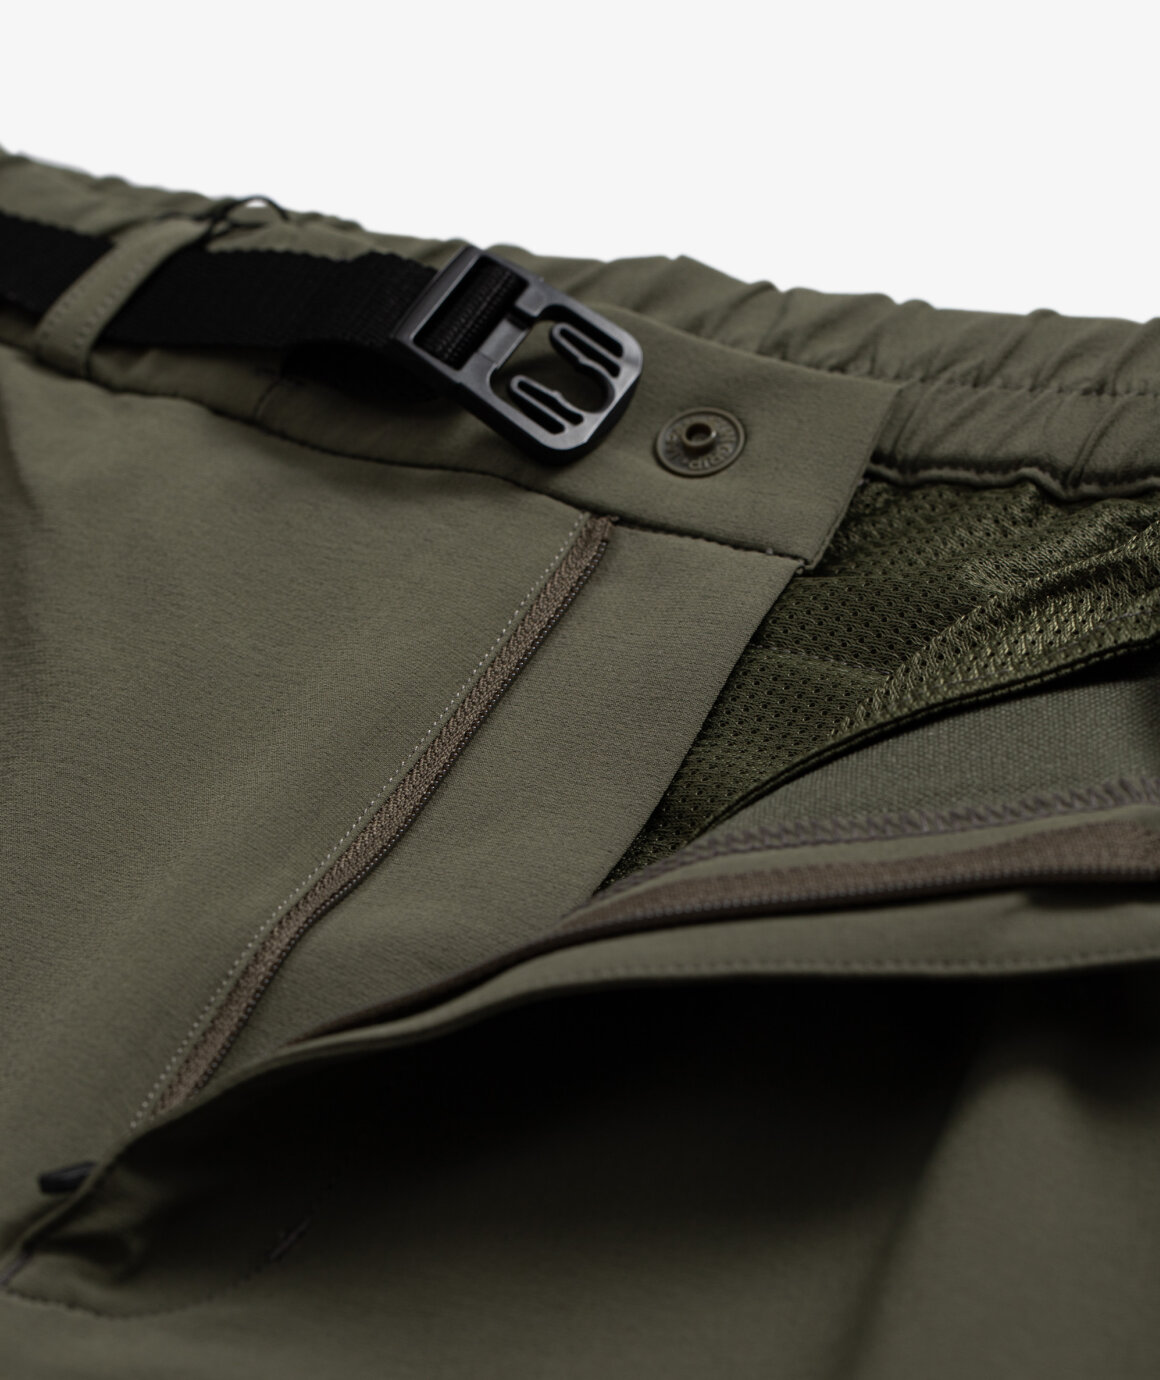 Norse Store | Shipping Worldwide - Snow Peak DWR Comfort Shorts - Olive